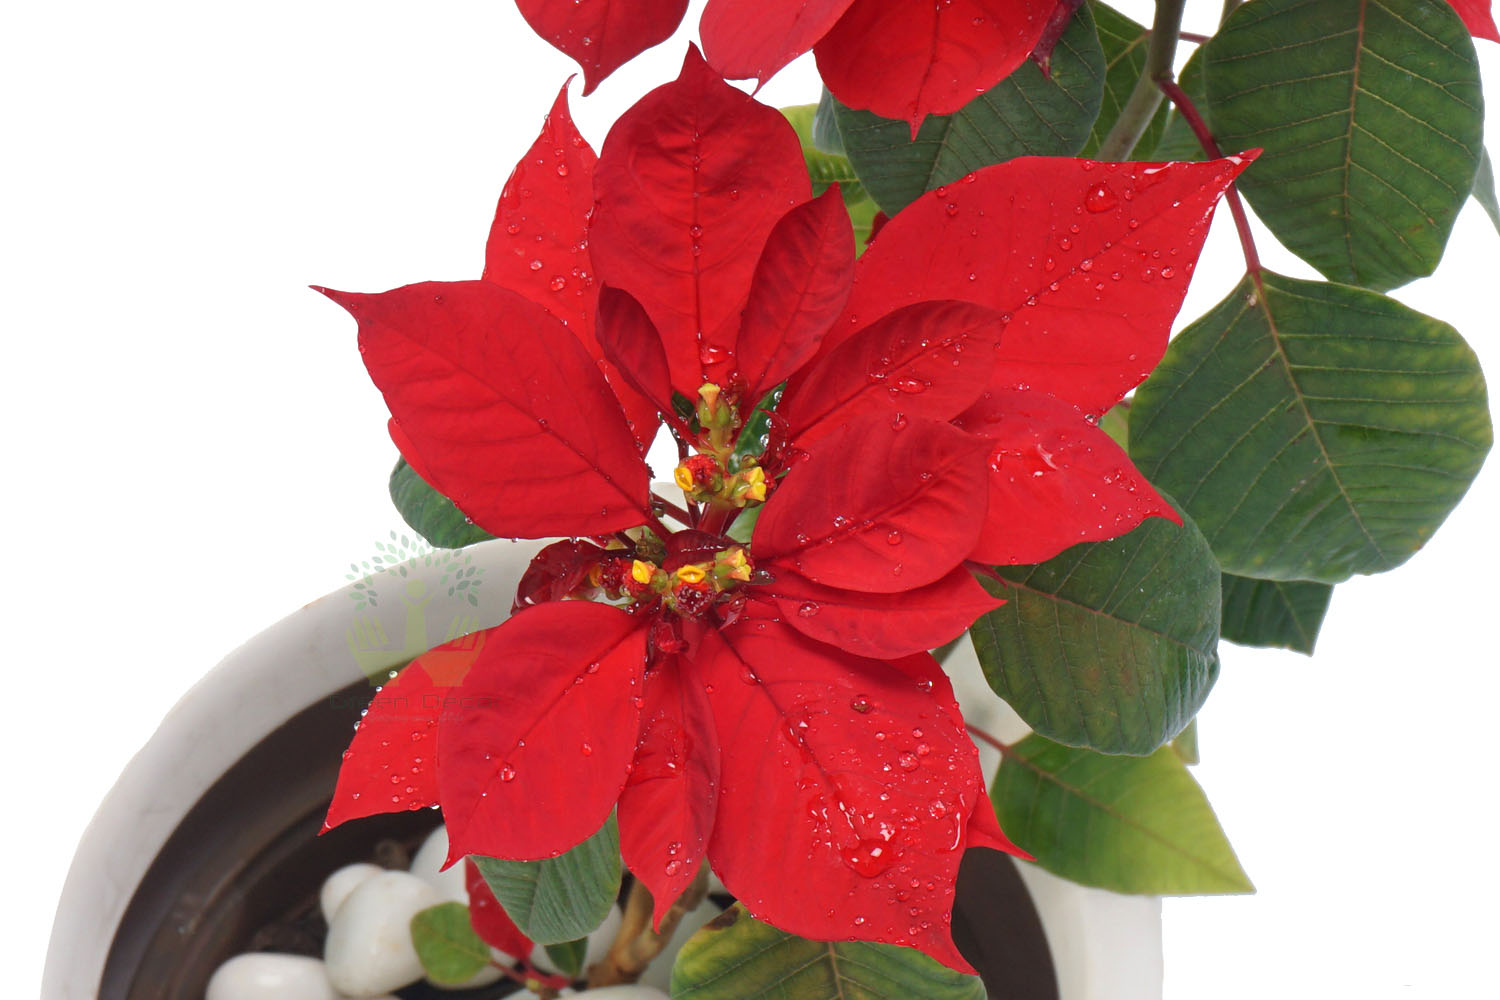 Buy Poinsettia Plants , White Pots and seeds in Delhi NCR by the best online nursery shop Greendecor.